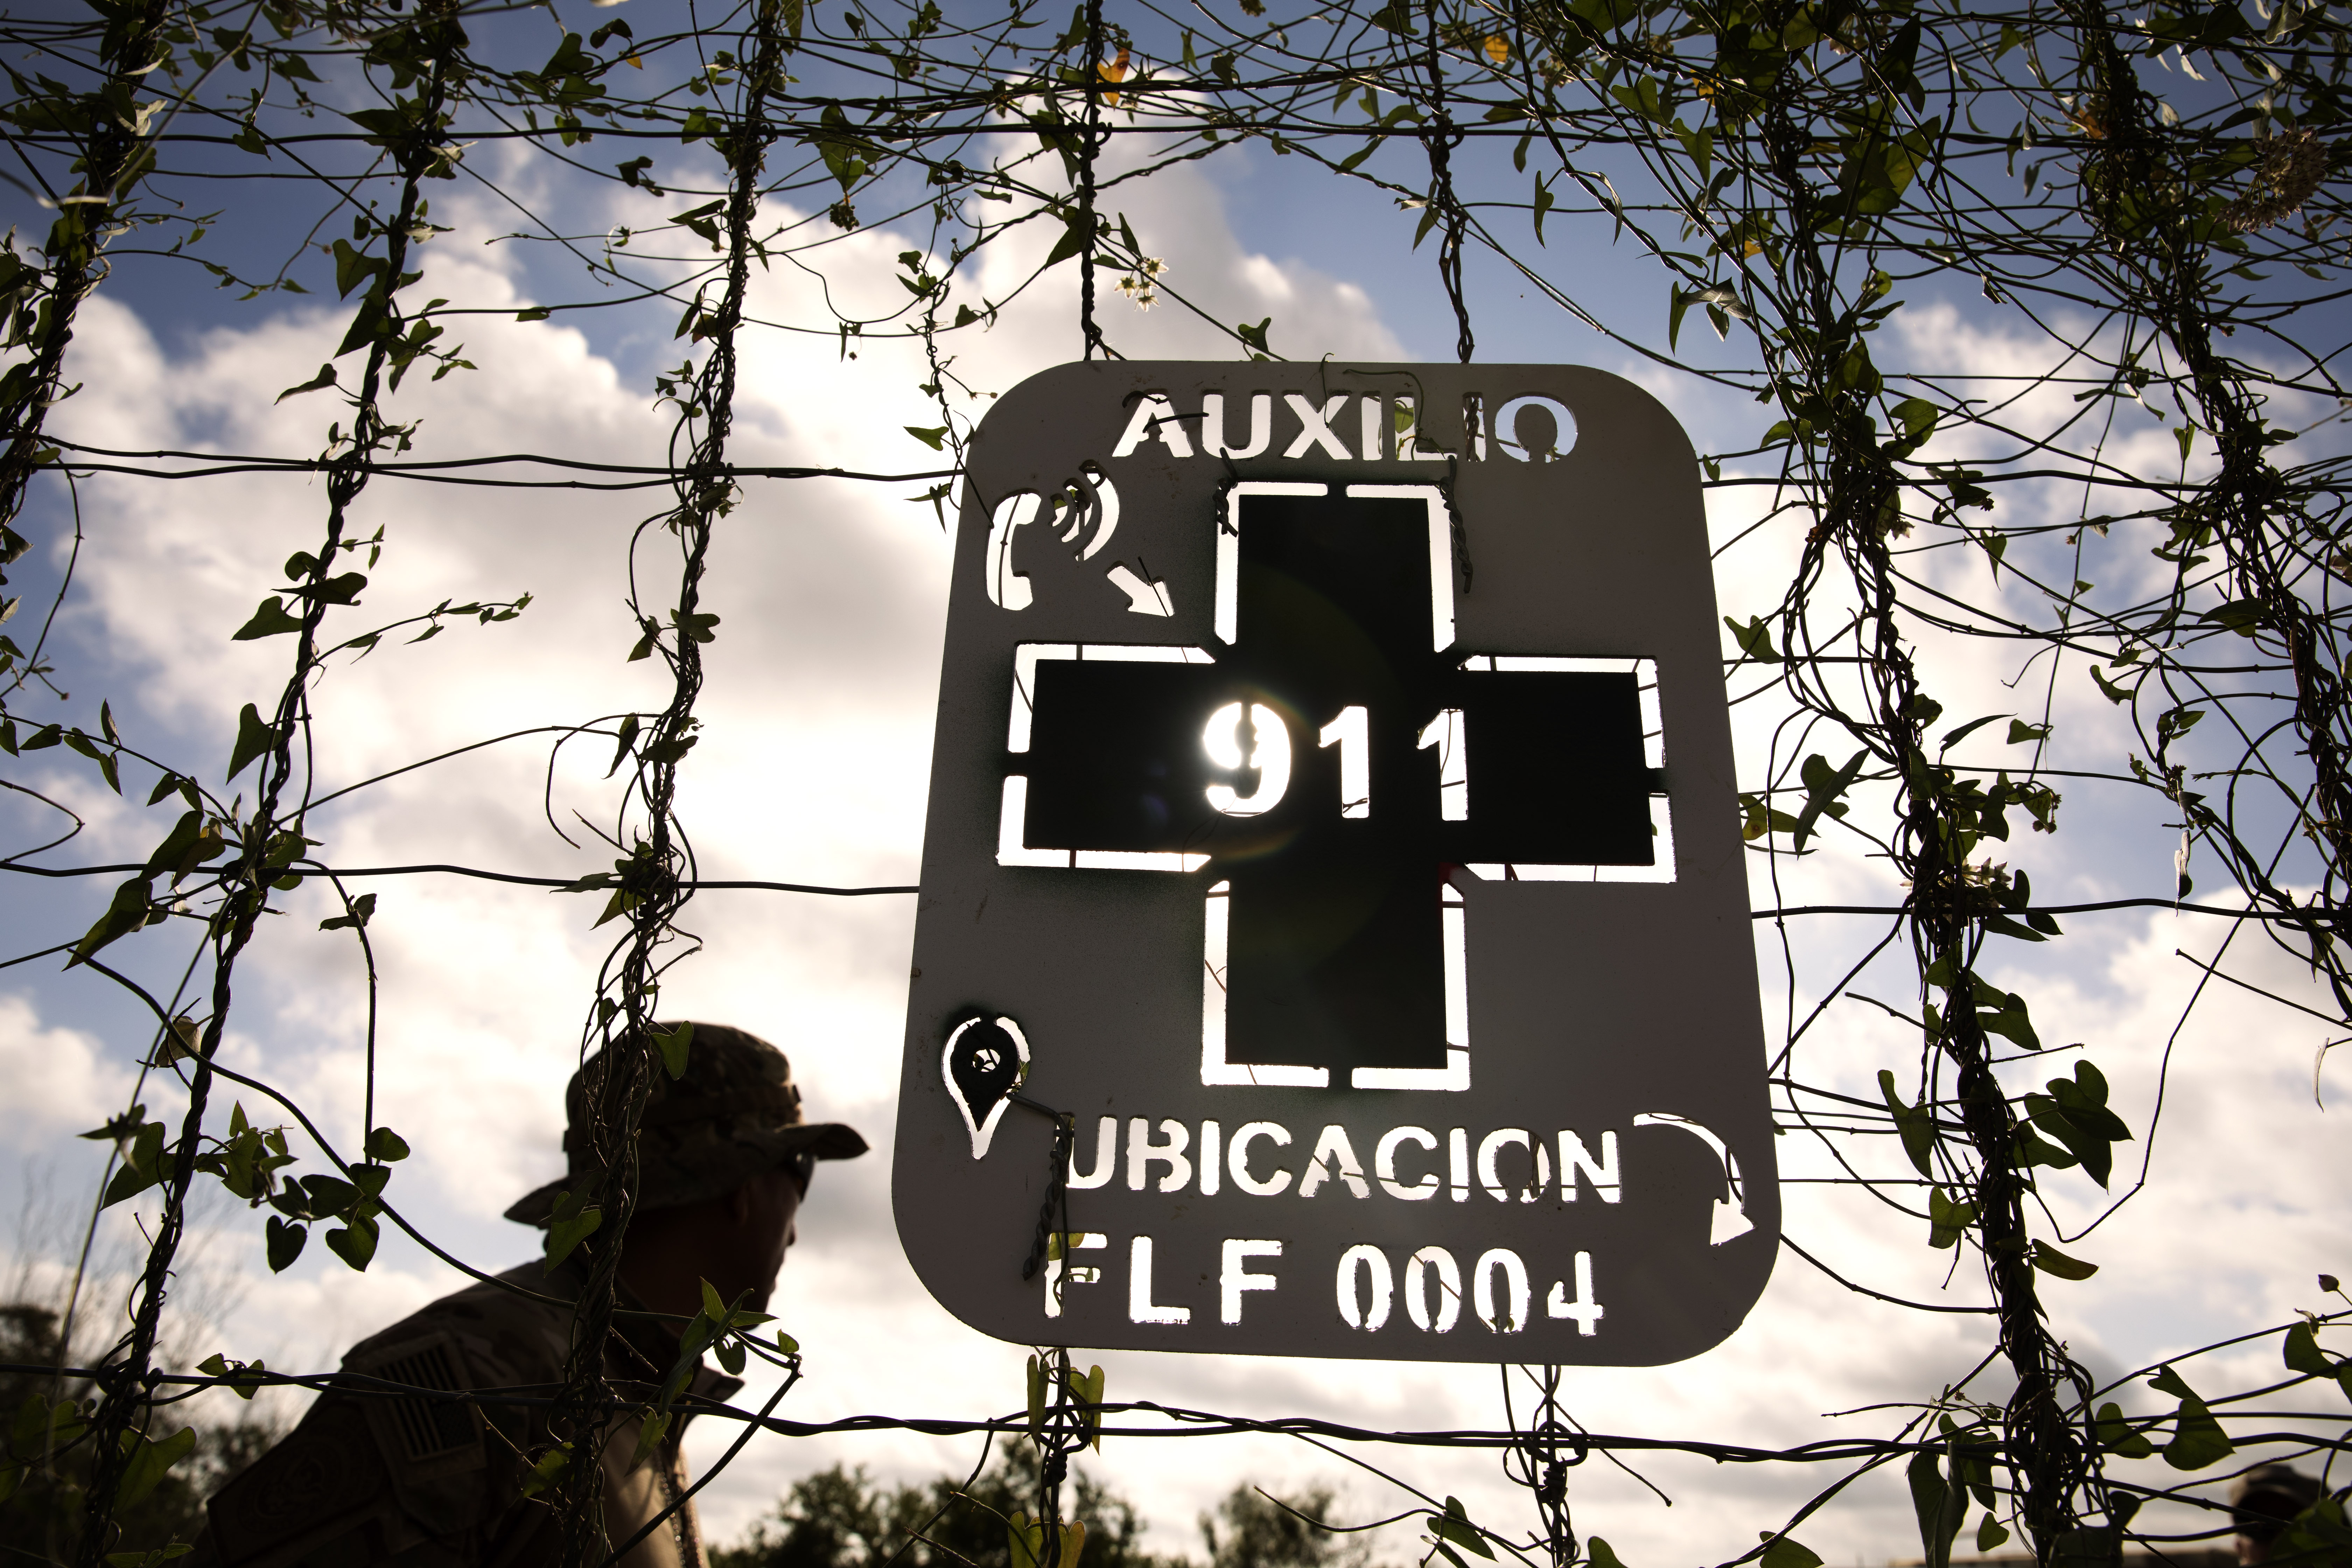 A sign posted by Border Patrol on a ranch in South Texas tells lost illegal aliens their exact location to speed their rescue by